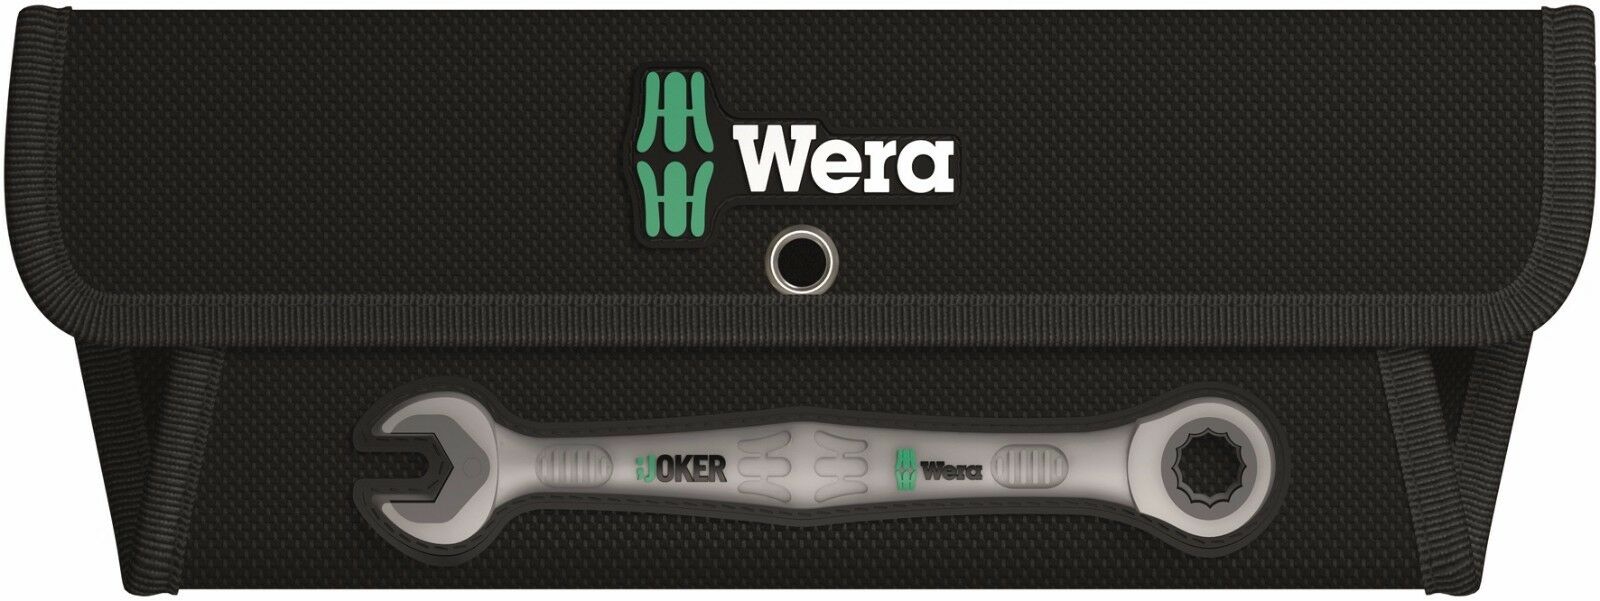 wera joker combination ratcheting wrench set imperial 4 pieces 05073295001